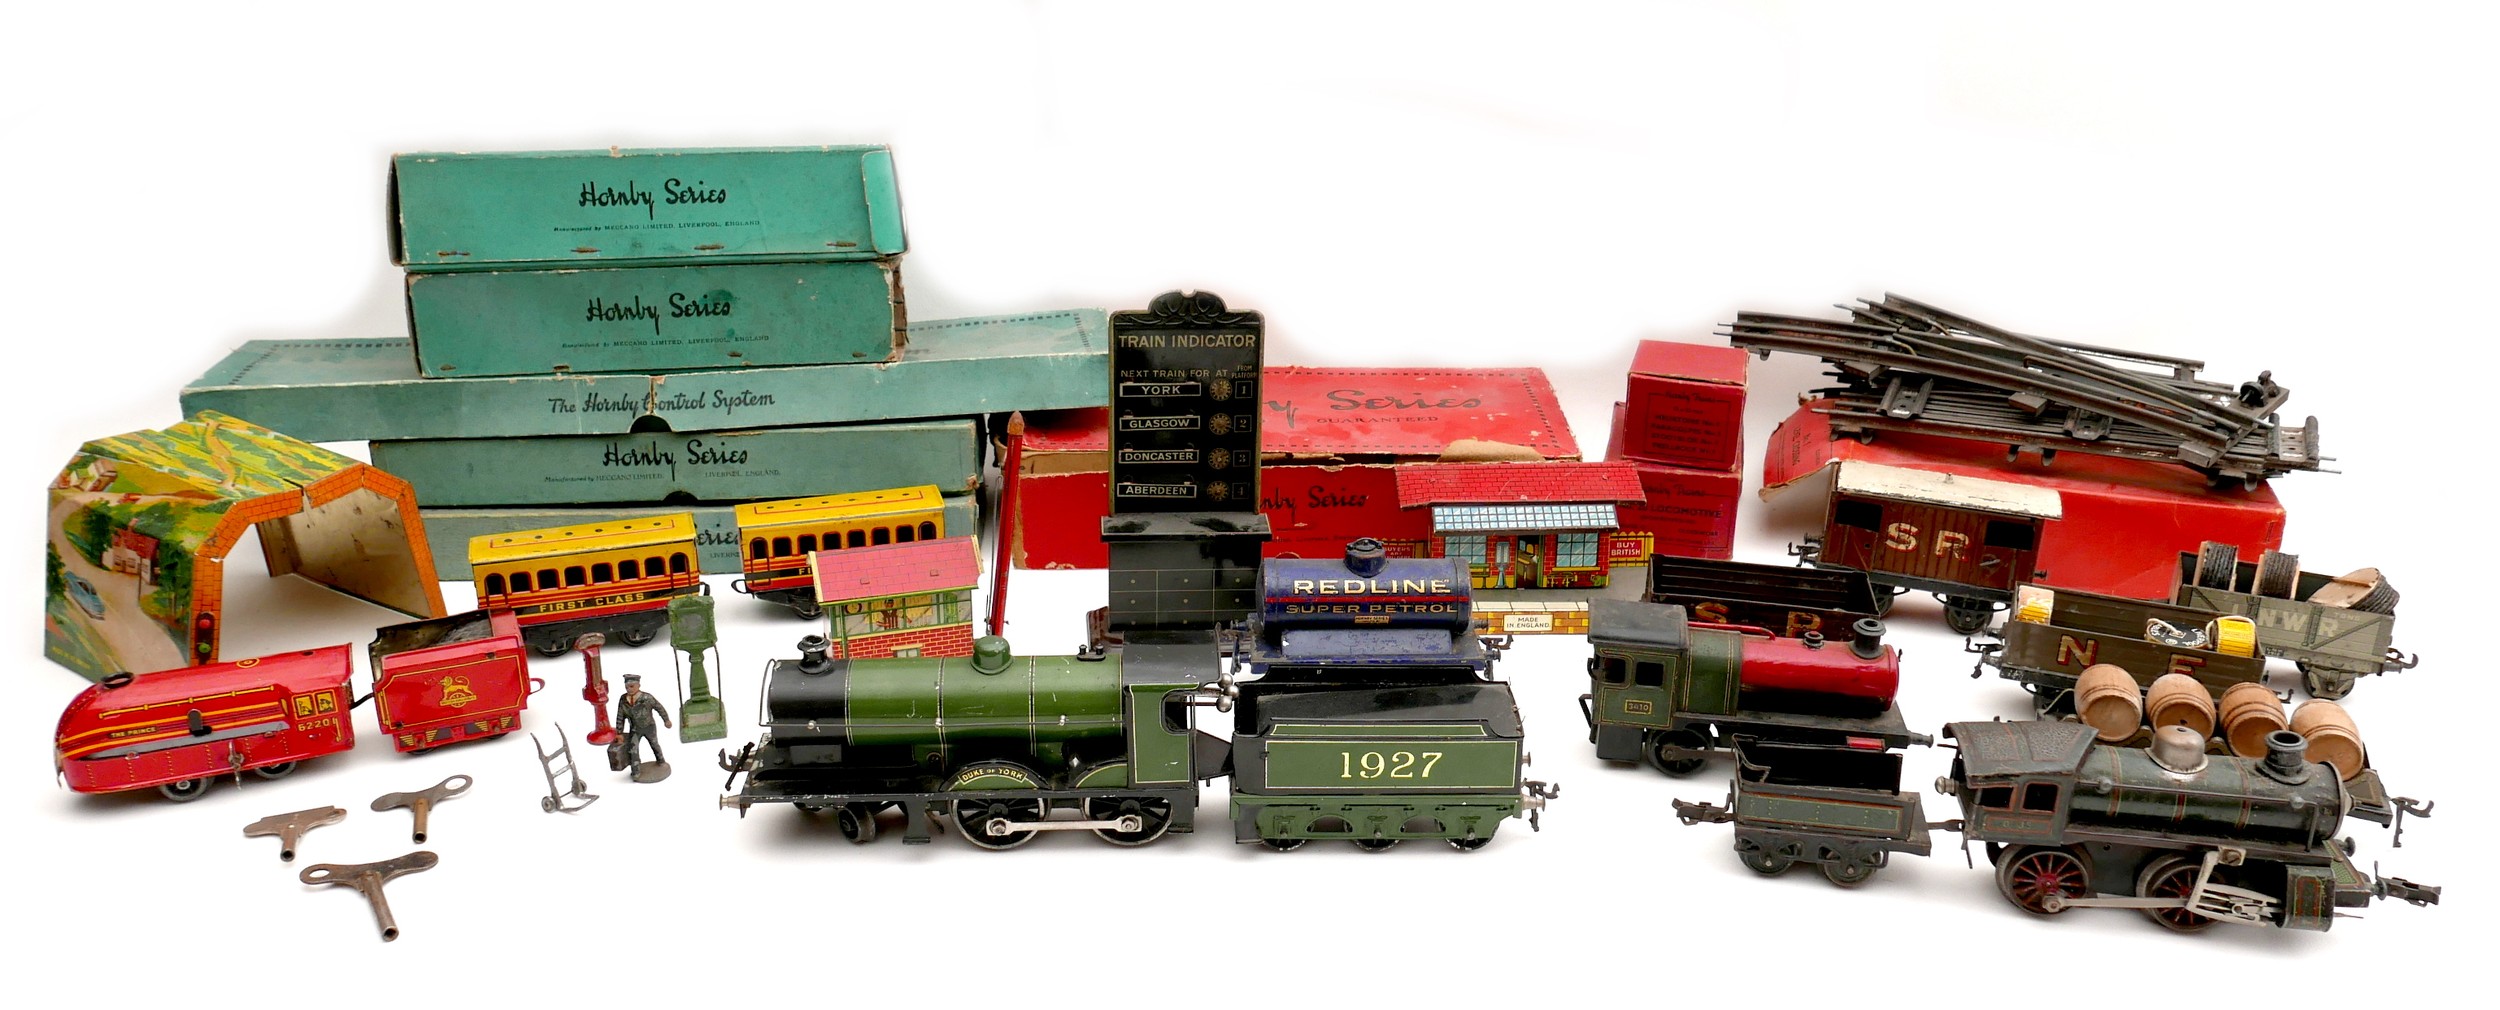 A collection of O gauge tinplate railway, early 20th century, including a clockwork Bassett-Lowke